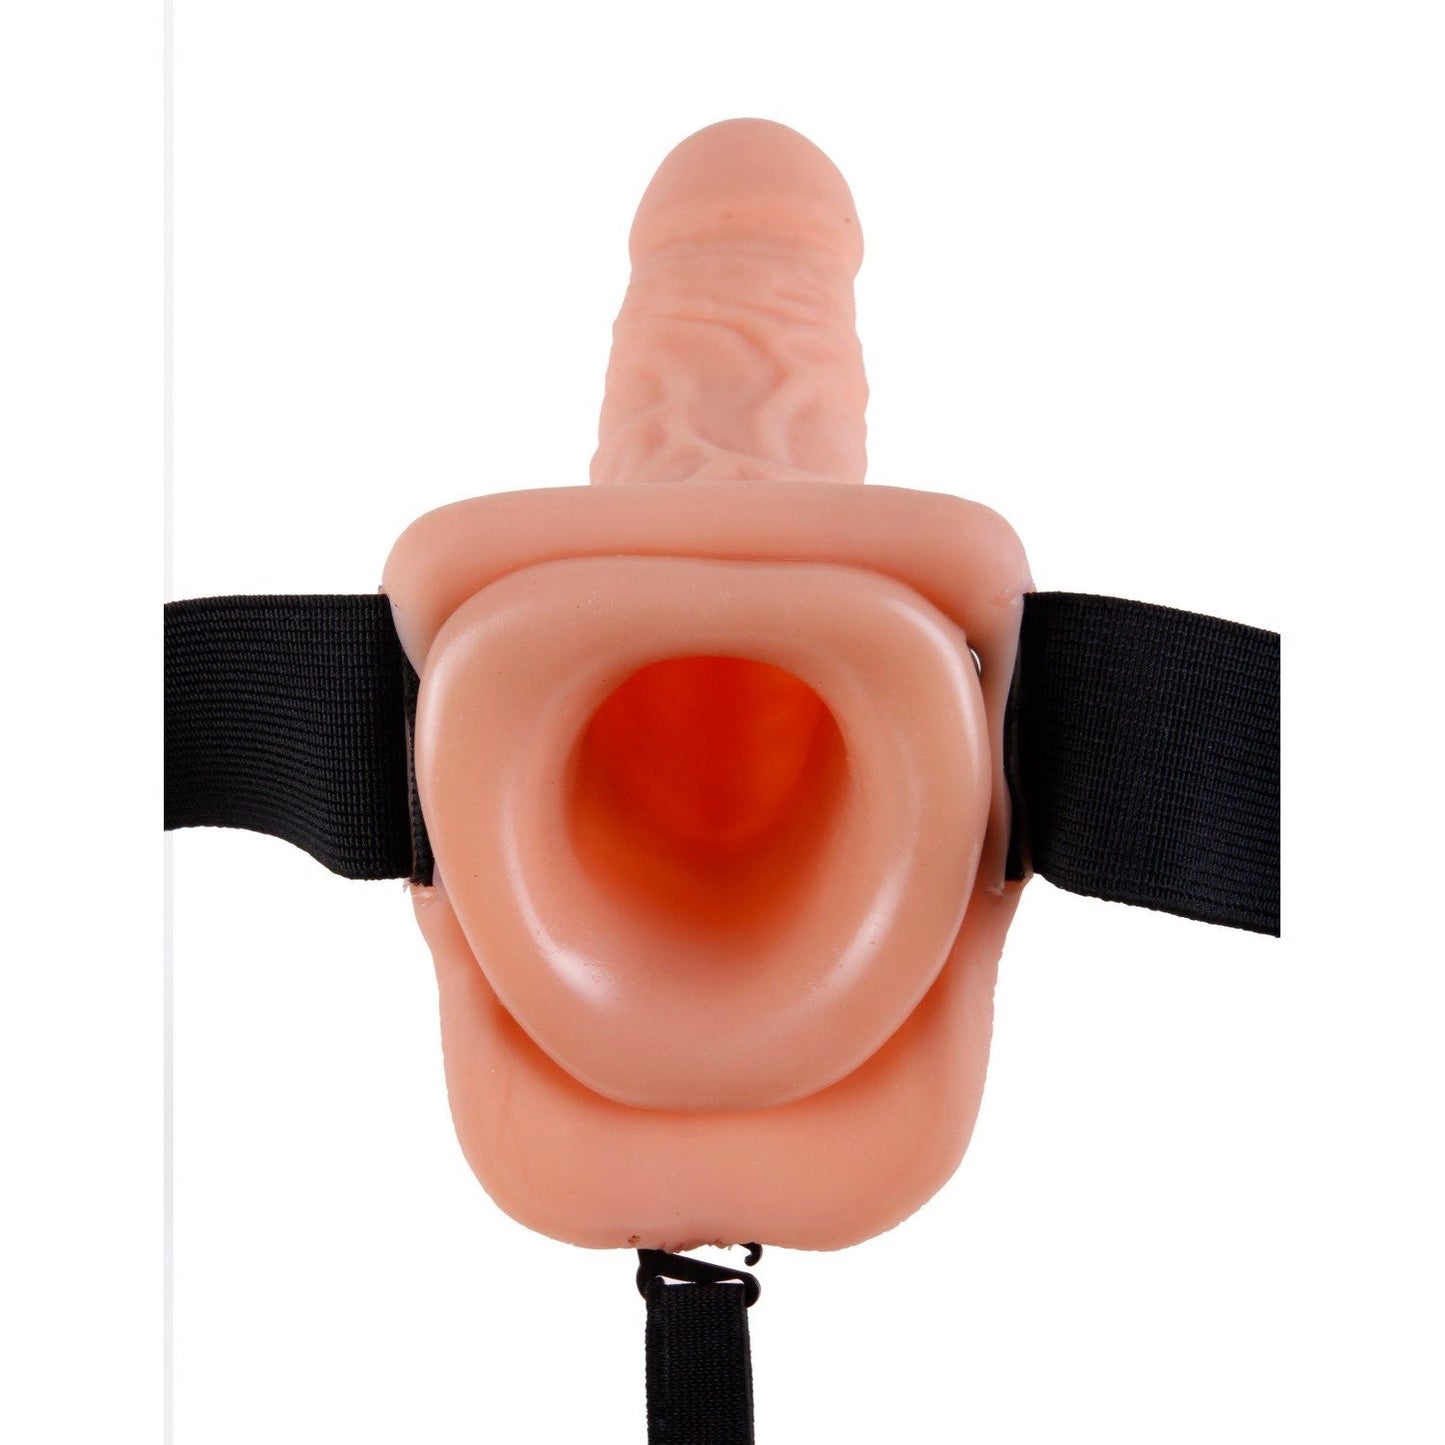 7" Hollow Strap-On With Balls - Flesh 17.8 cm (7") Hollow Strap-On